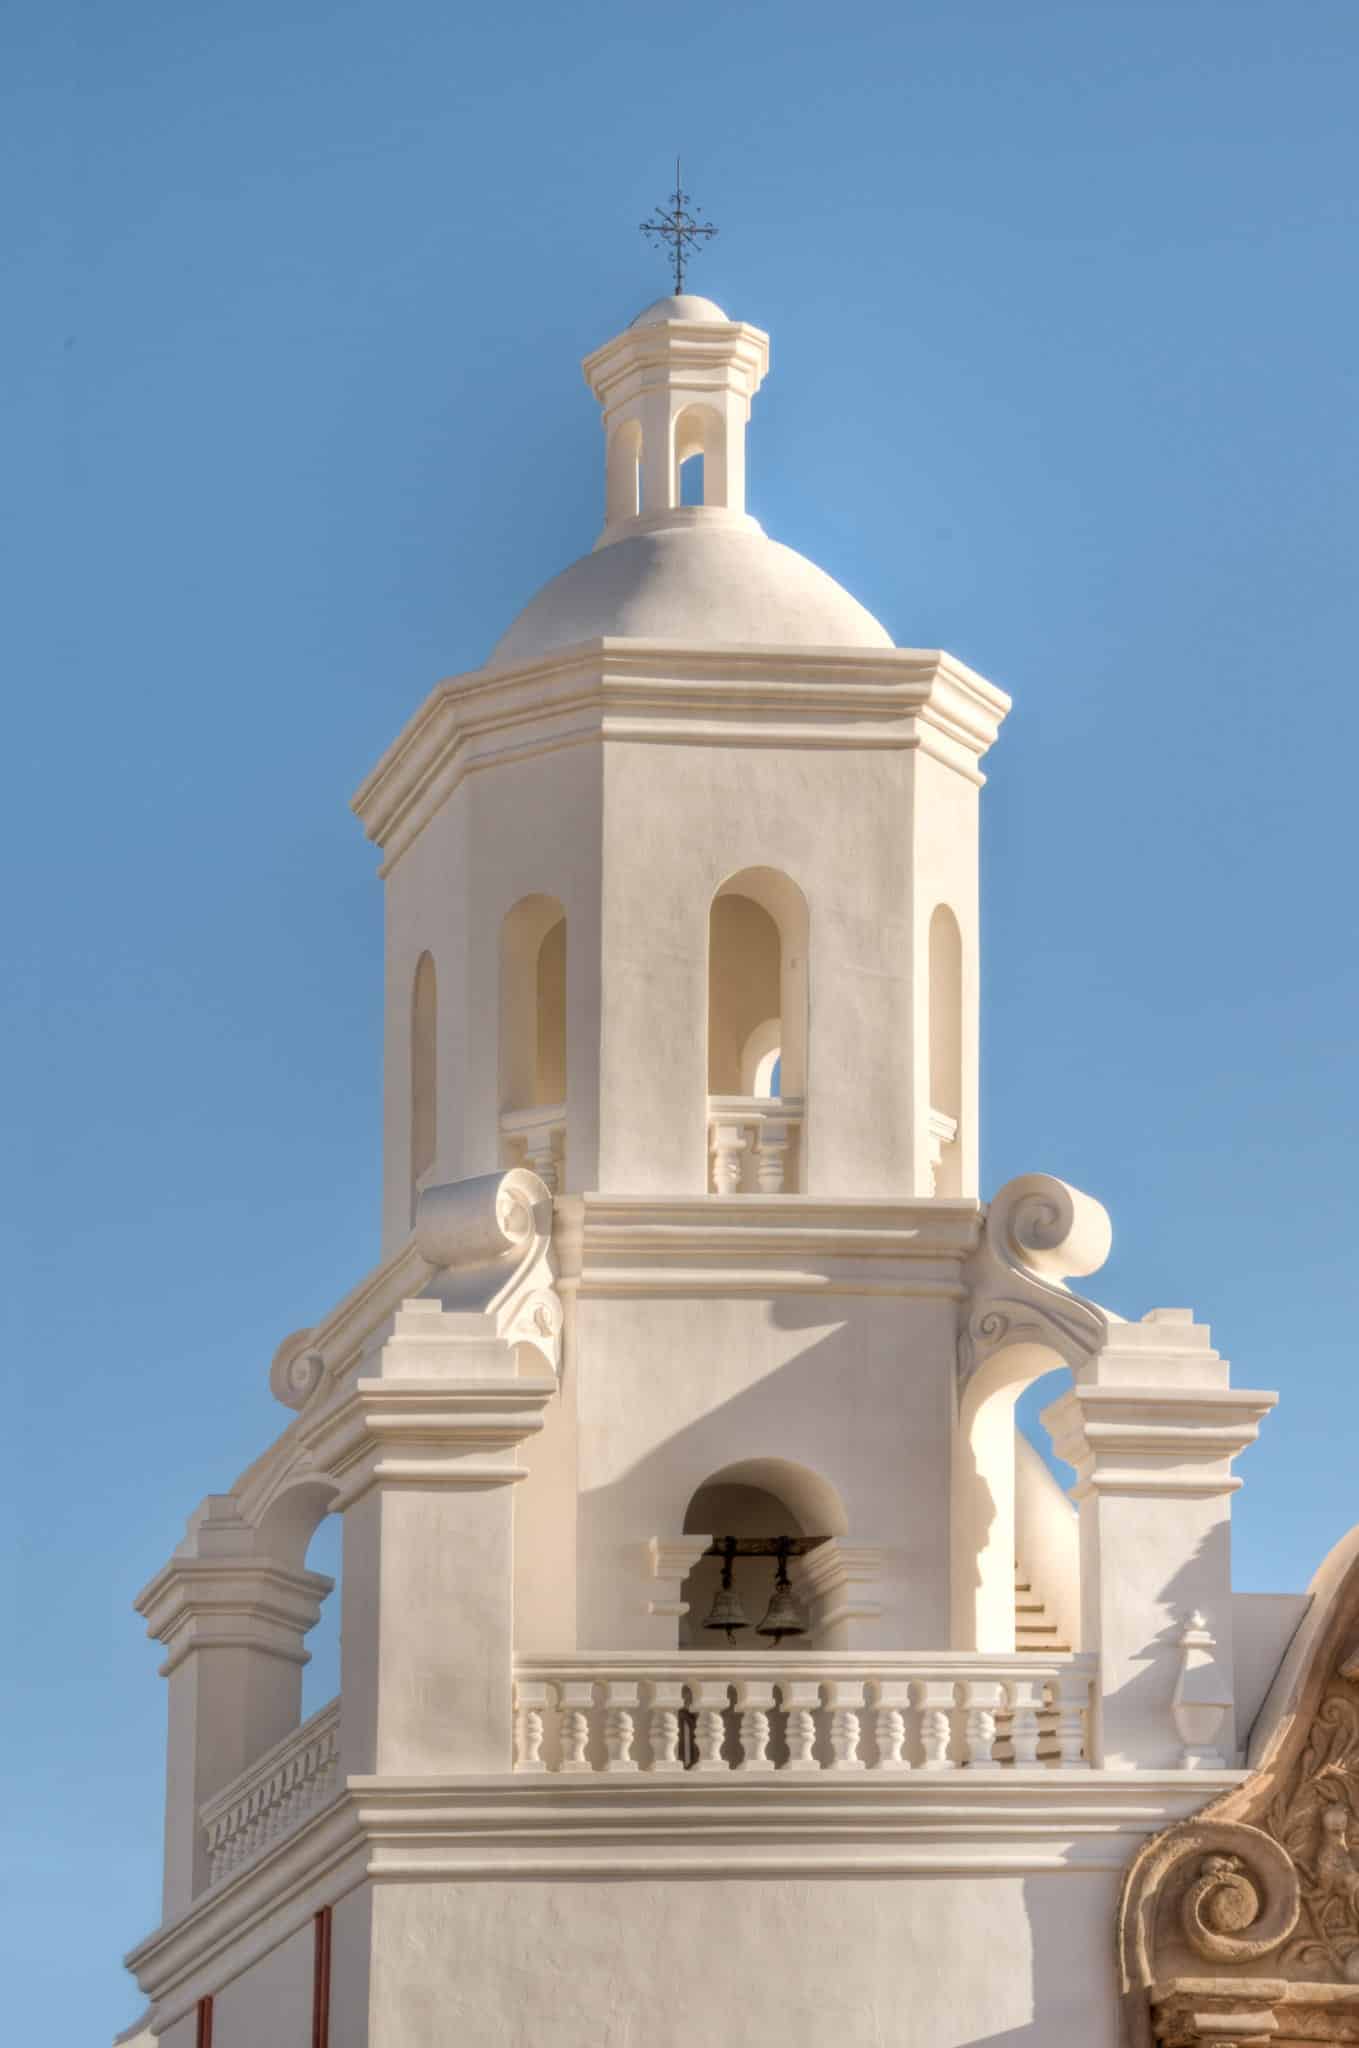 The West Tower as seen from the South face of San Xavier del Bac (White Dove of the Desert), located south of Tucson, Arizona.